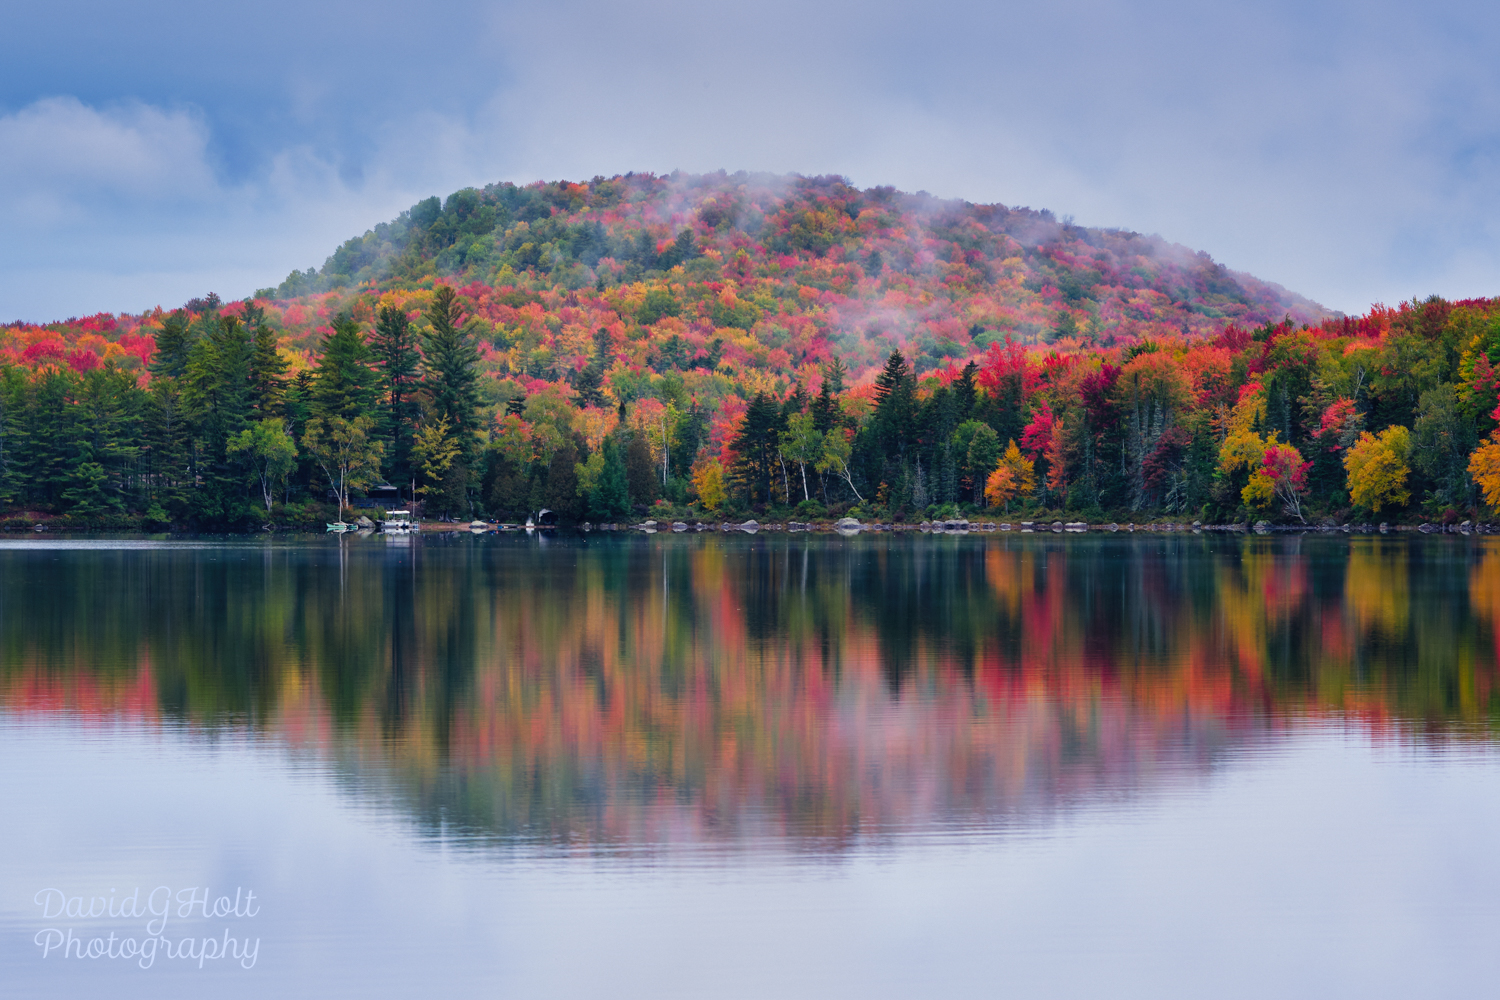 Misty New England Morning at the Lake Scenic Fine Art Print Wall Art